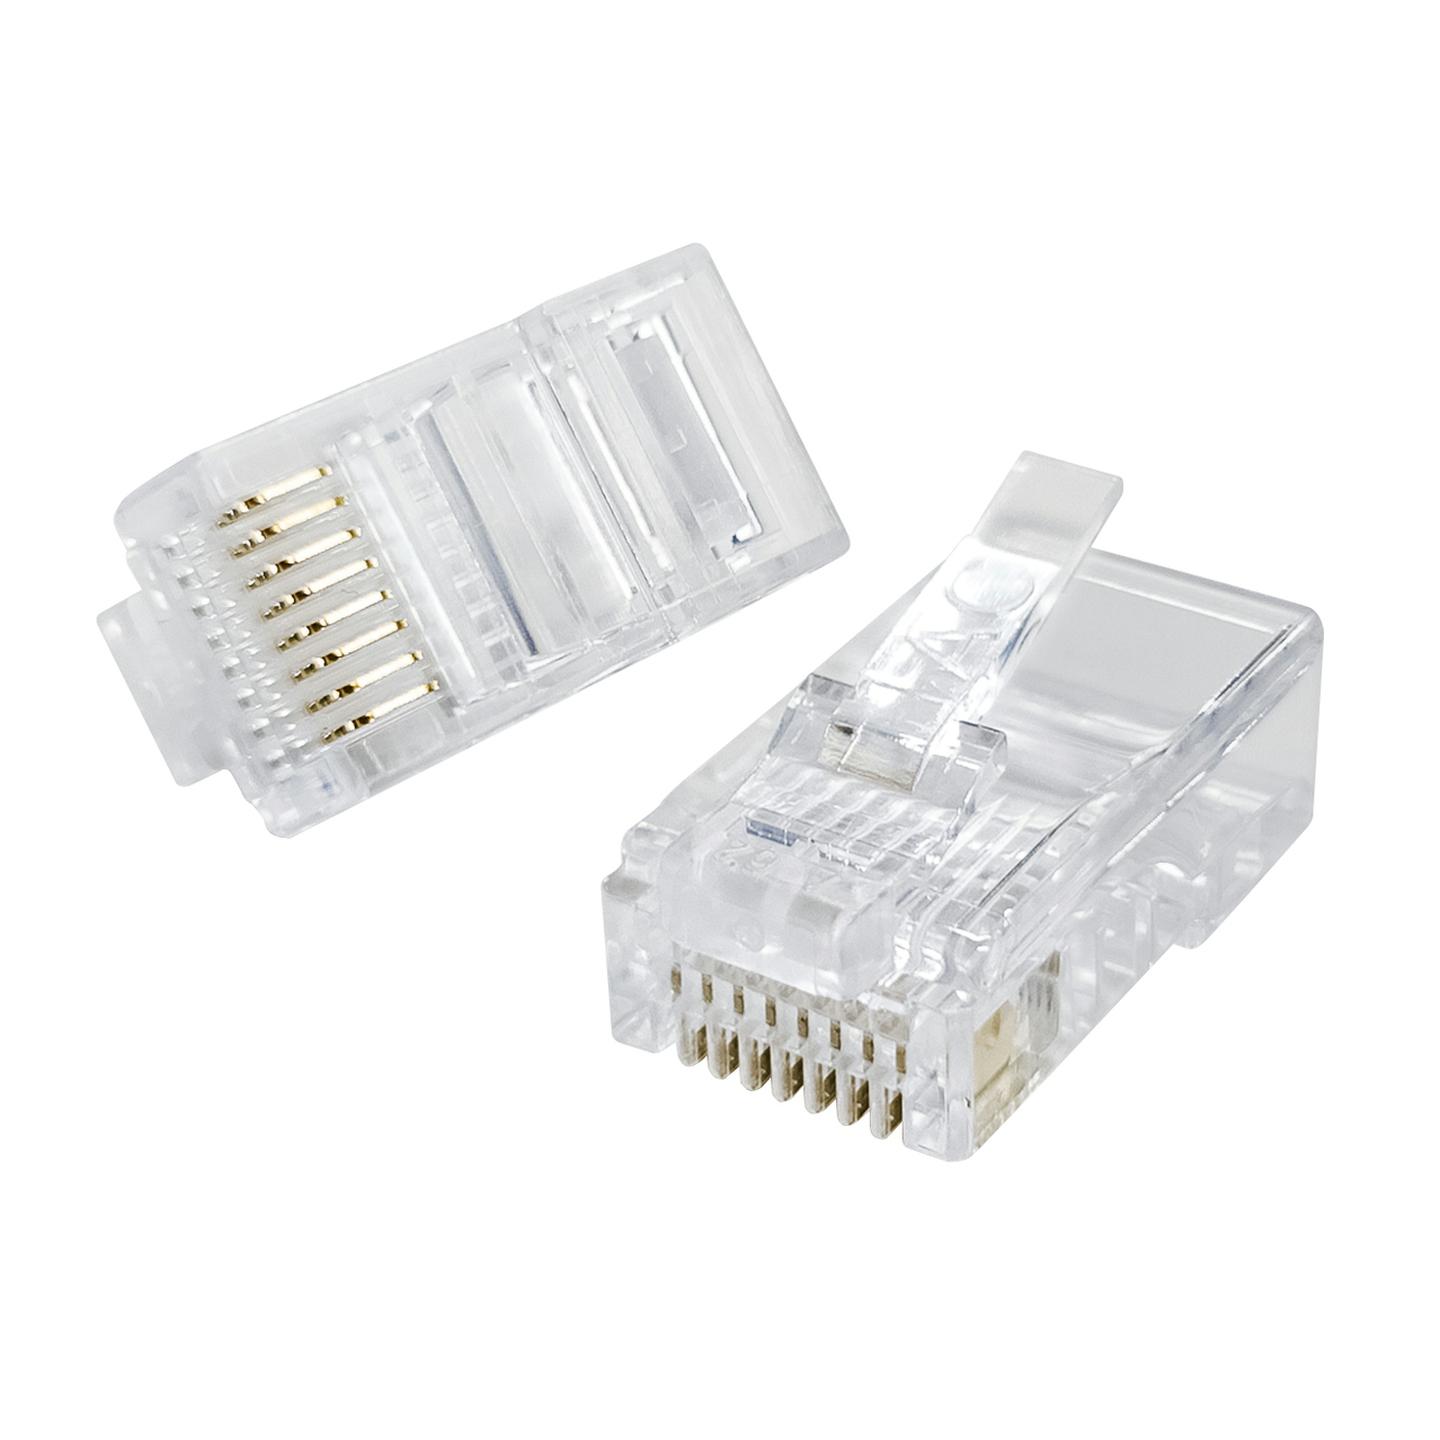 8 Pin US Type Telephone Plugs for Stranded Cable